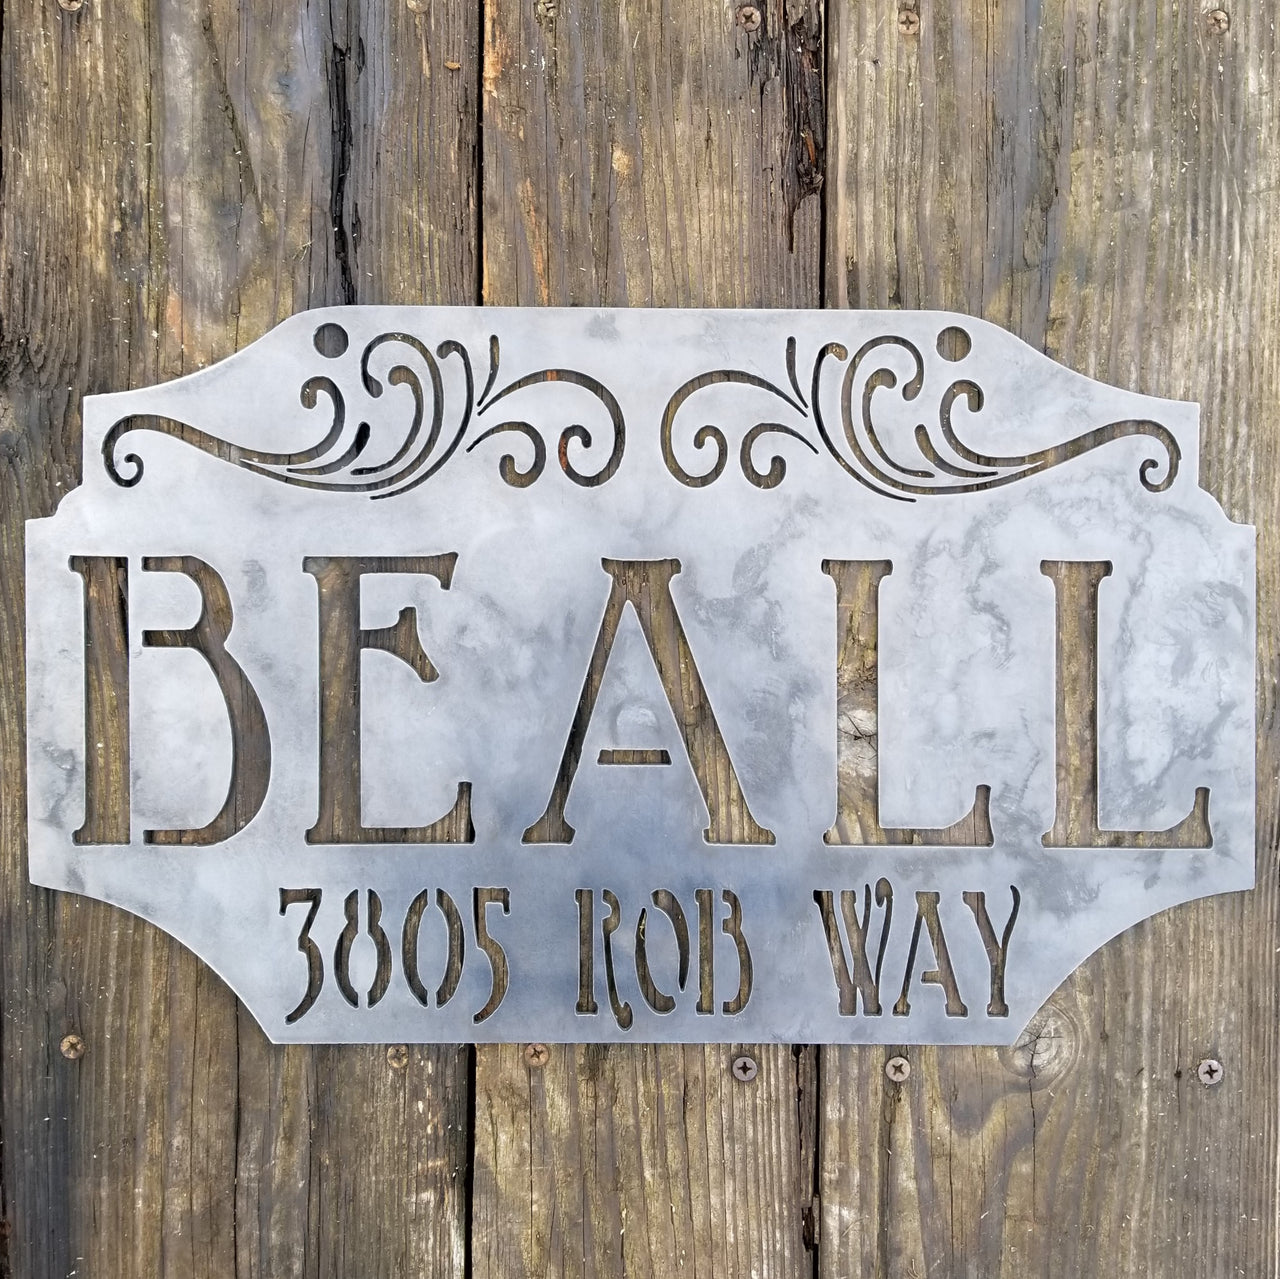 This custom metal address sign is raw steel and reads, "Beall 385 Rob Way"